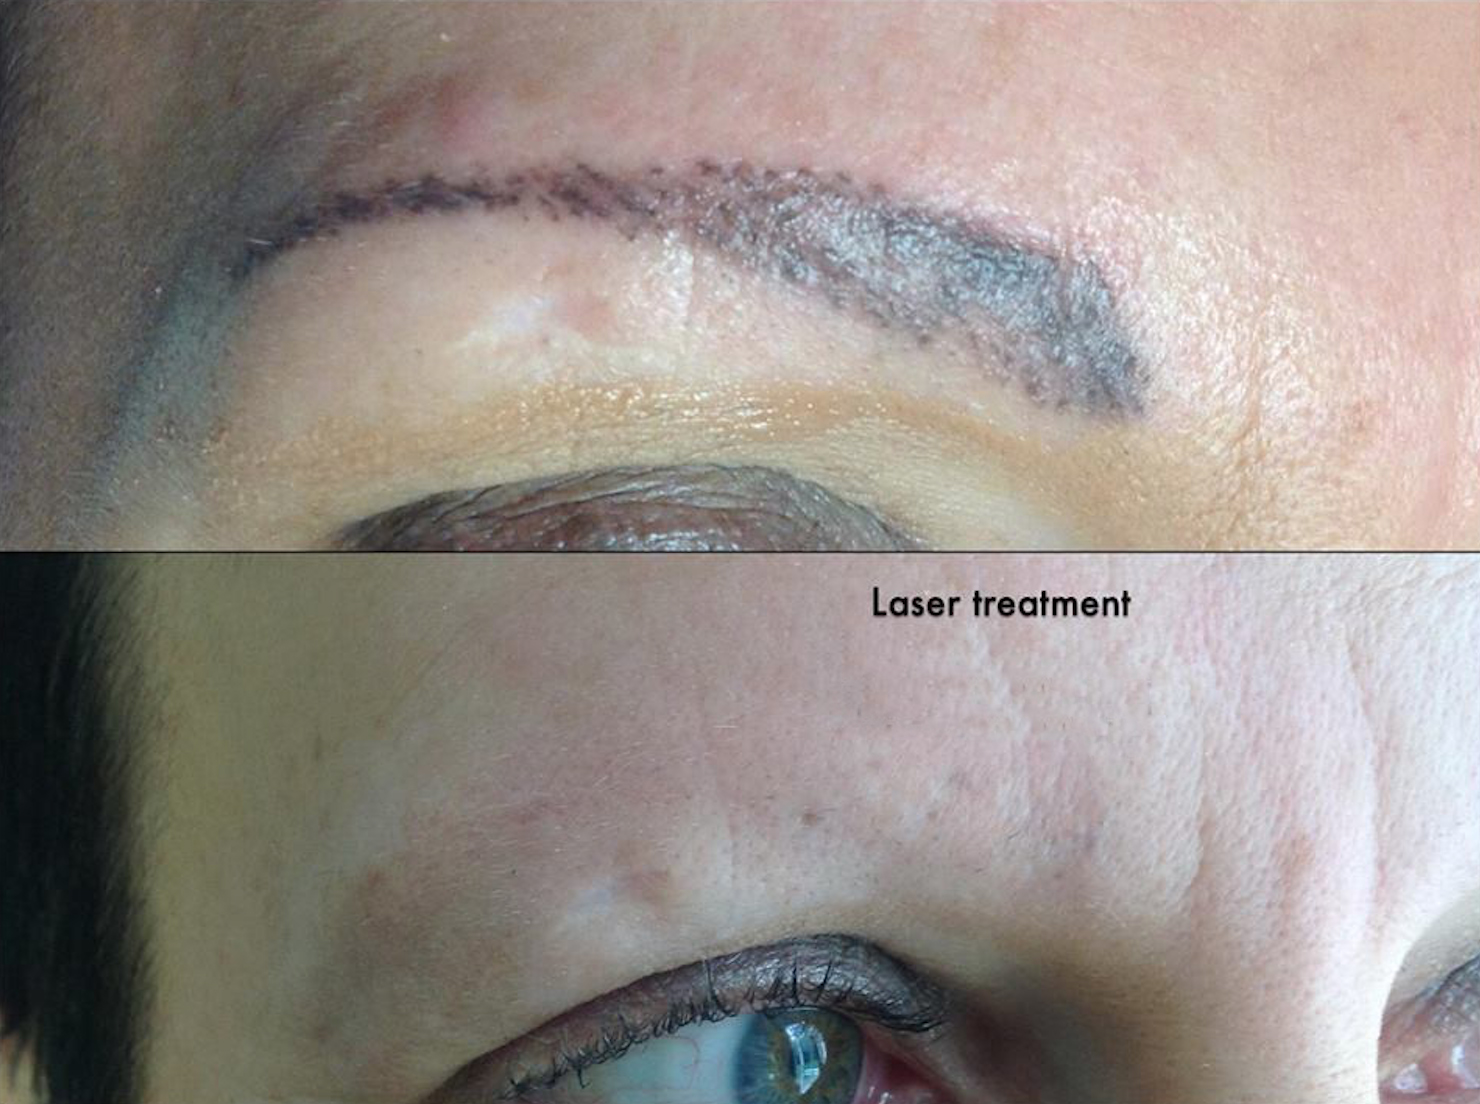 Eyebrow and Eyelid Tattoo Removal - Patel Plastic Surgery Tattoo Removal